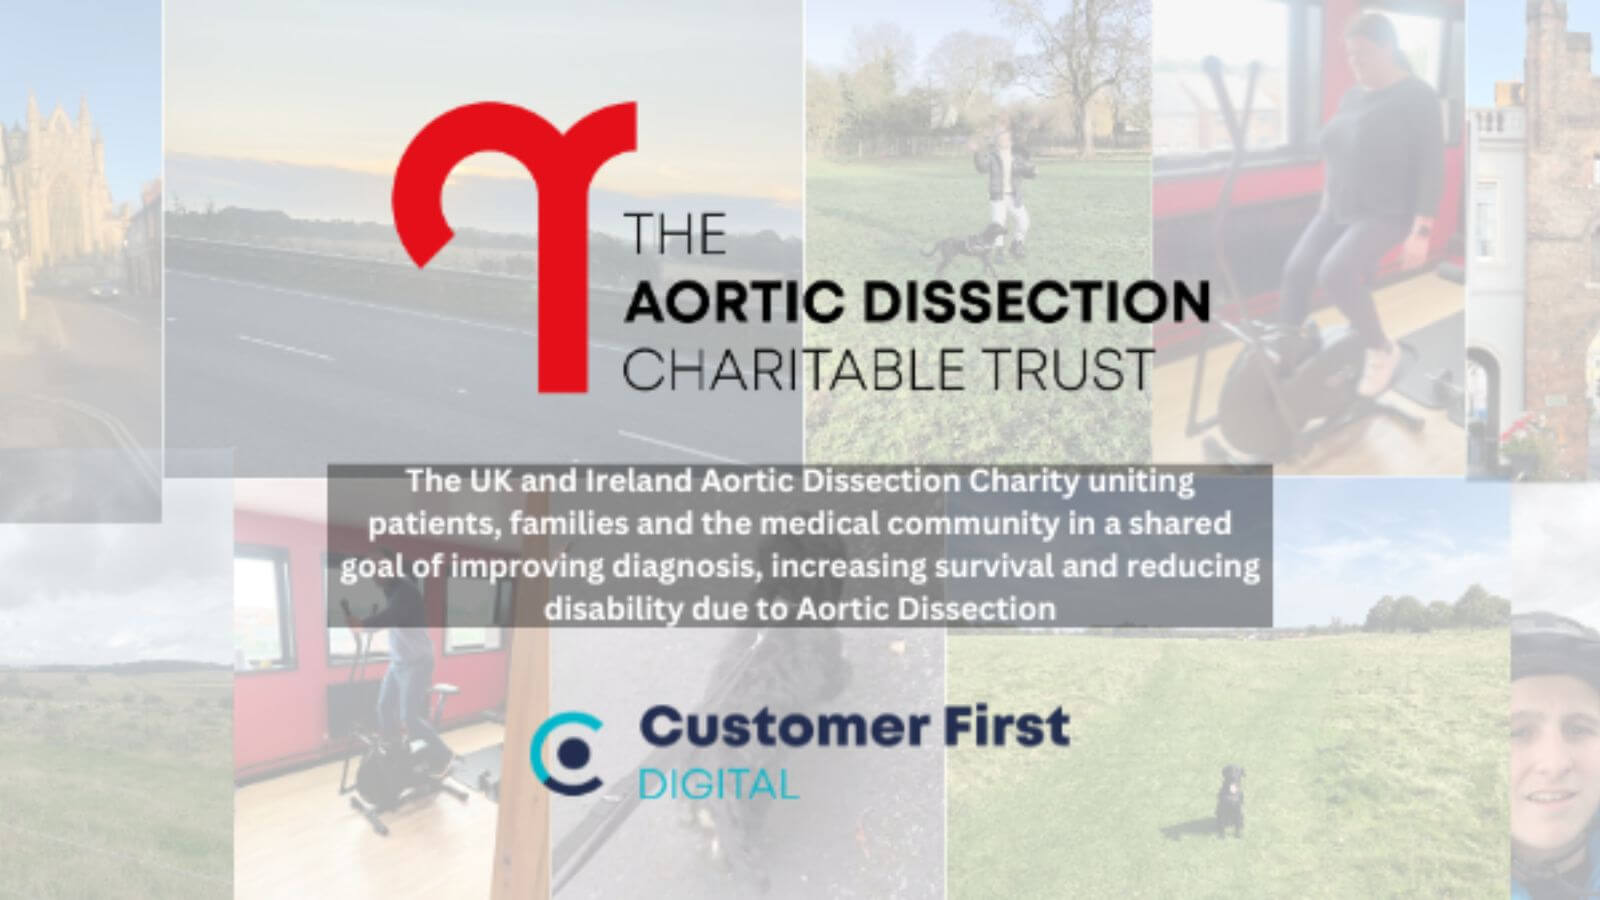 Customer First Digital Champions Aortic Dissection Awareness with Annual Fundraiser